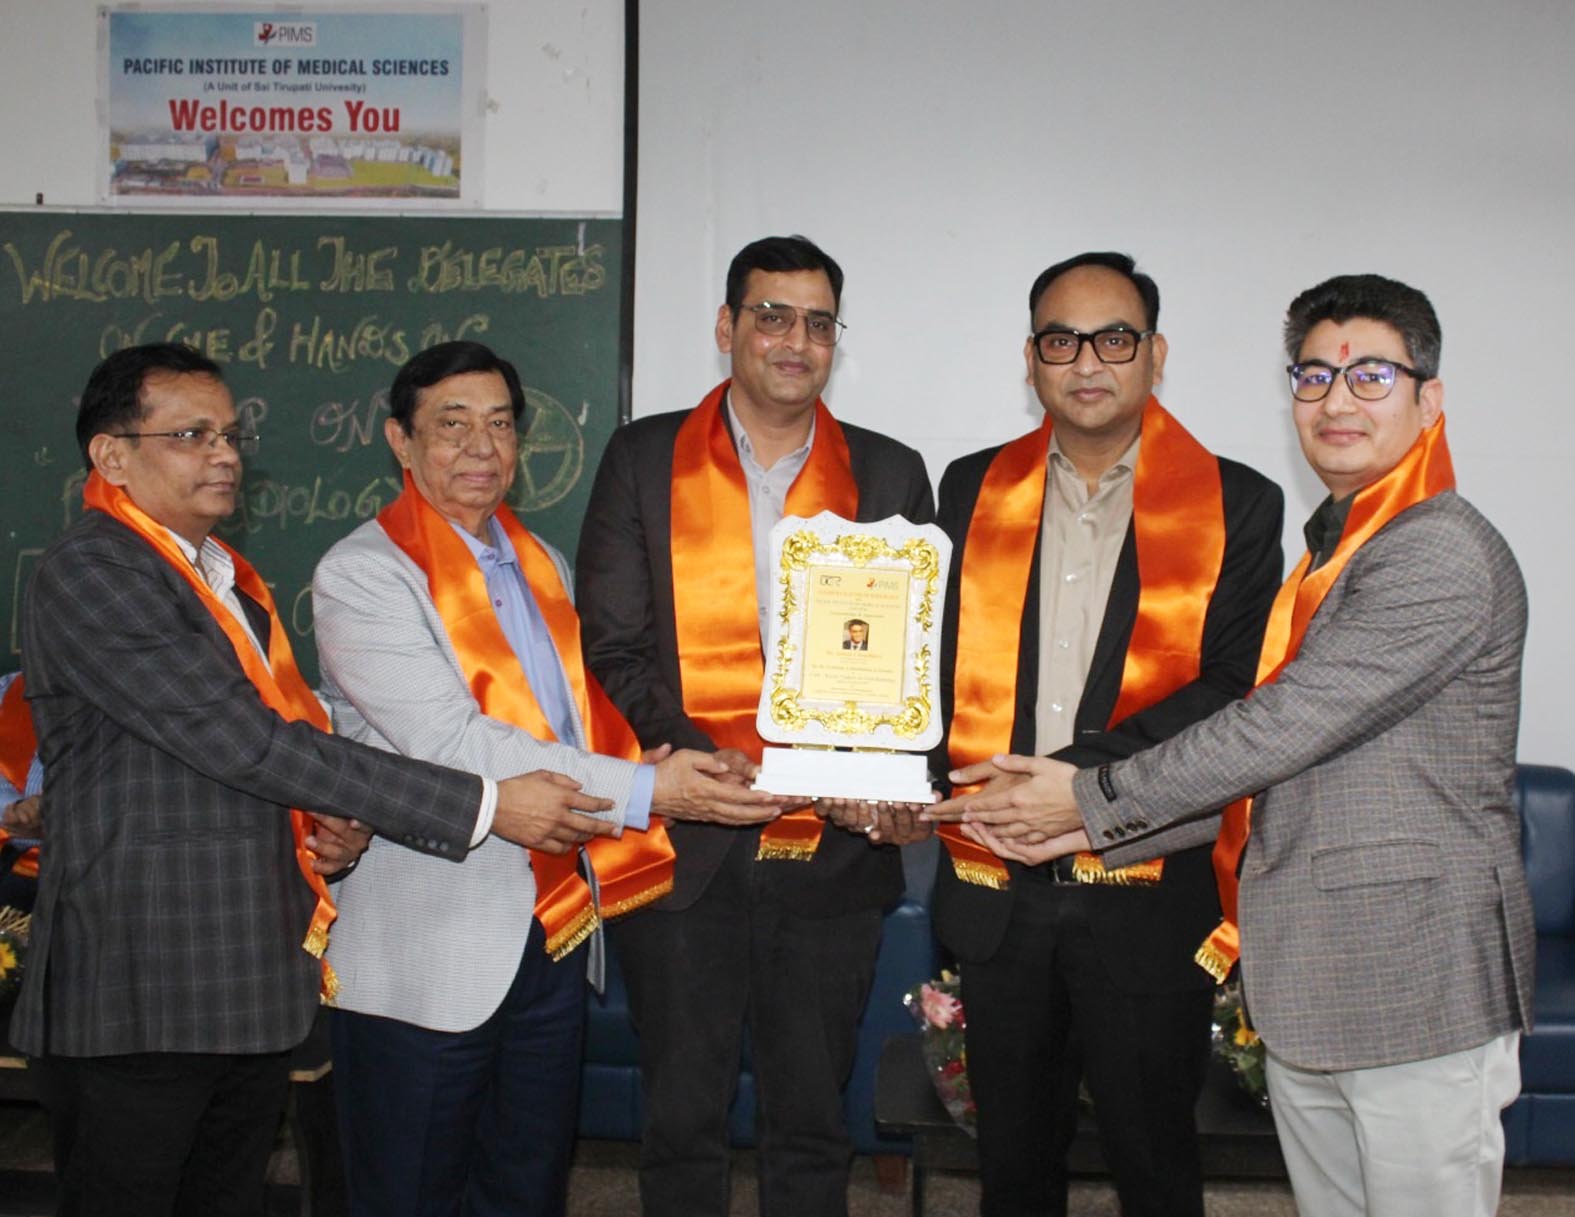 CME Organized by Udaipur Chapter of Radiology Focuses on Recent Updates in Fetal Radiology